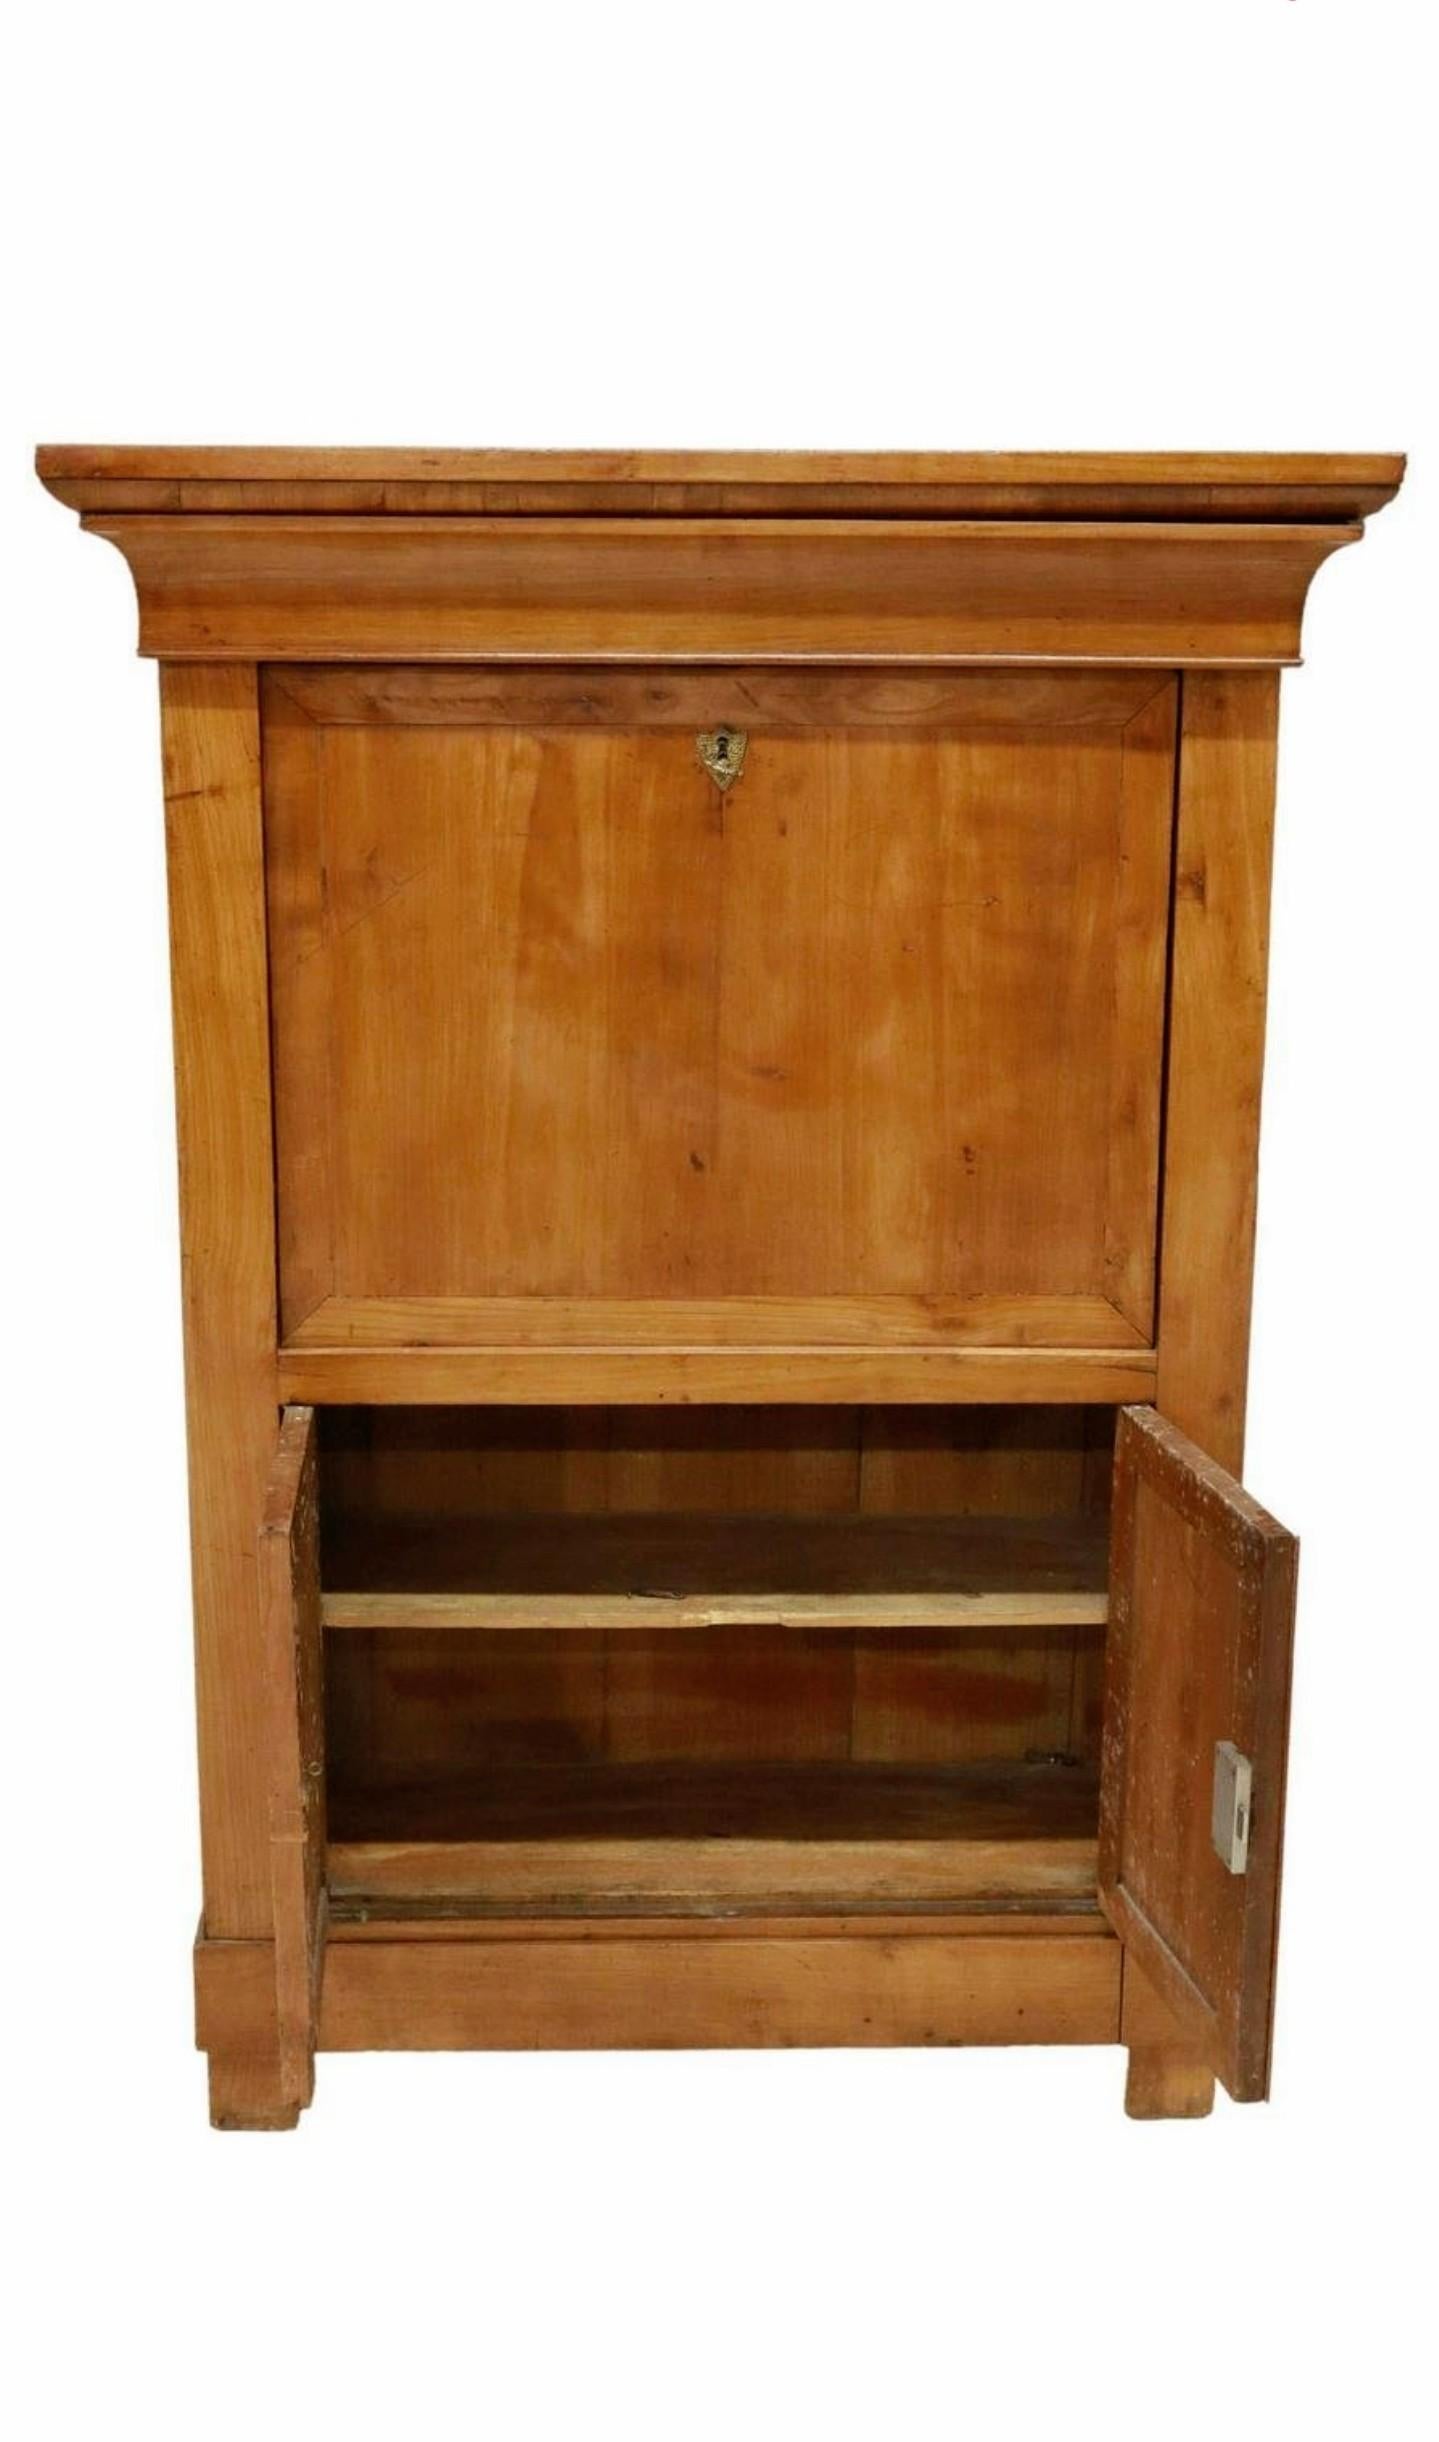 19th Century 19th C. French Empire Style Louis Philippe Period Secretaire Abattant For Sale